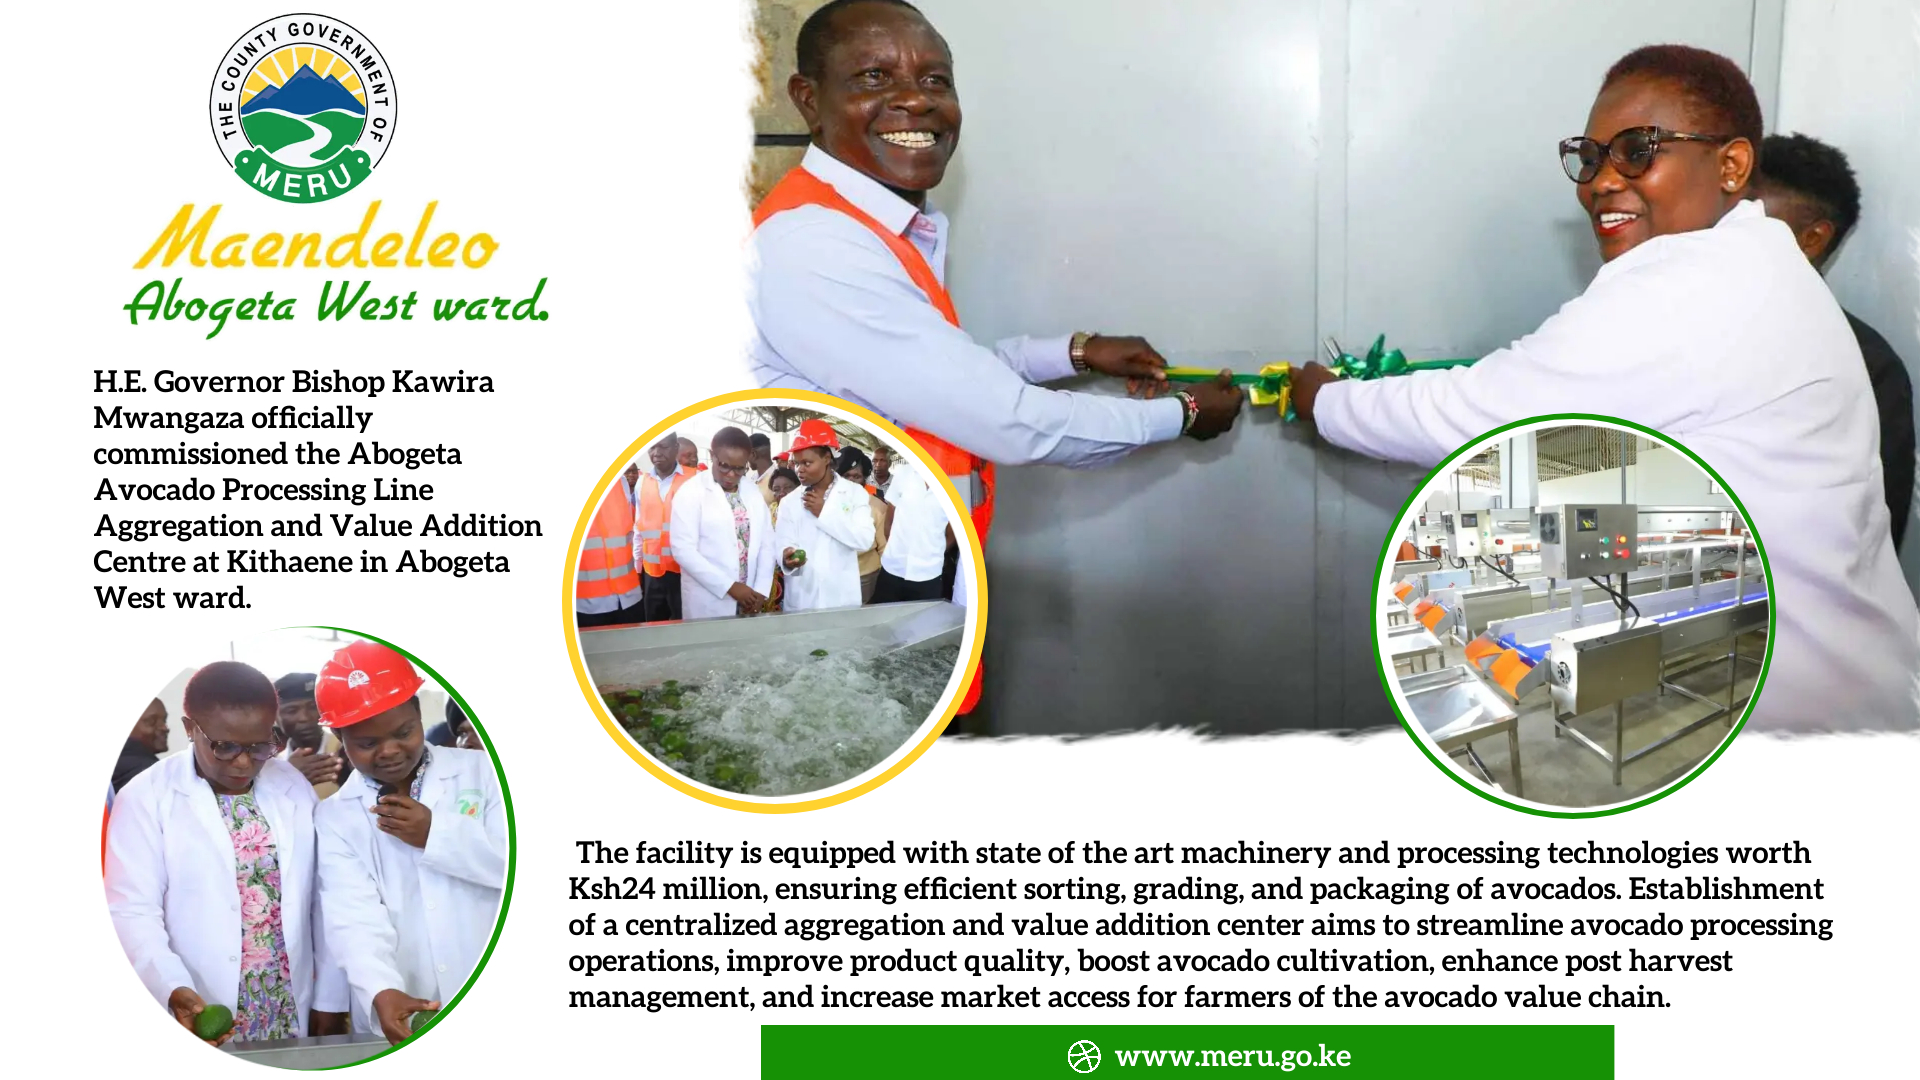 Commissioning Of Abogeta Avocado Processing Line Aggregation And Value Addition Centre By H.E Governor Bishop Kawira Mwangaza In Kithaene, Abogeta West Ward.